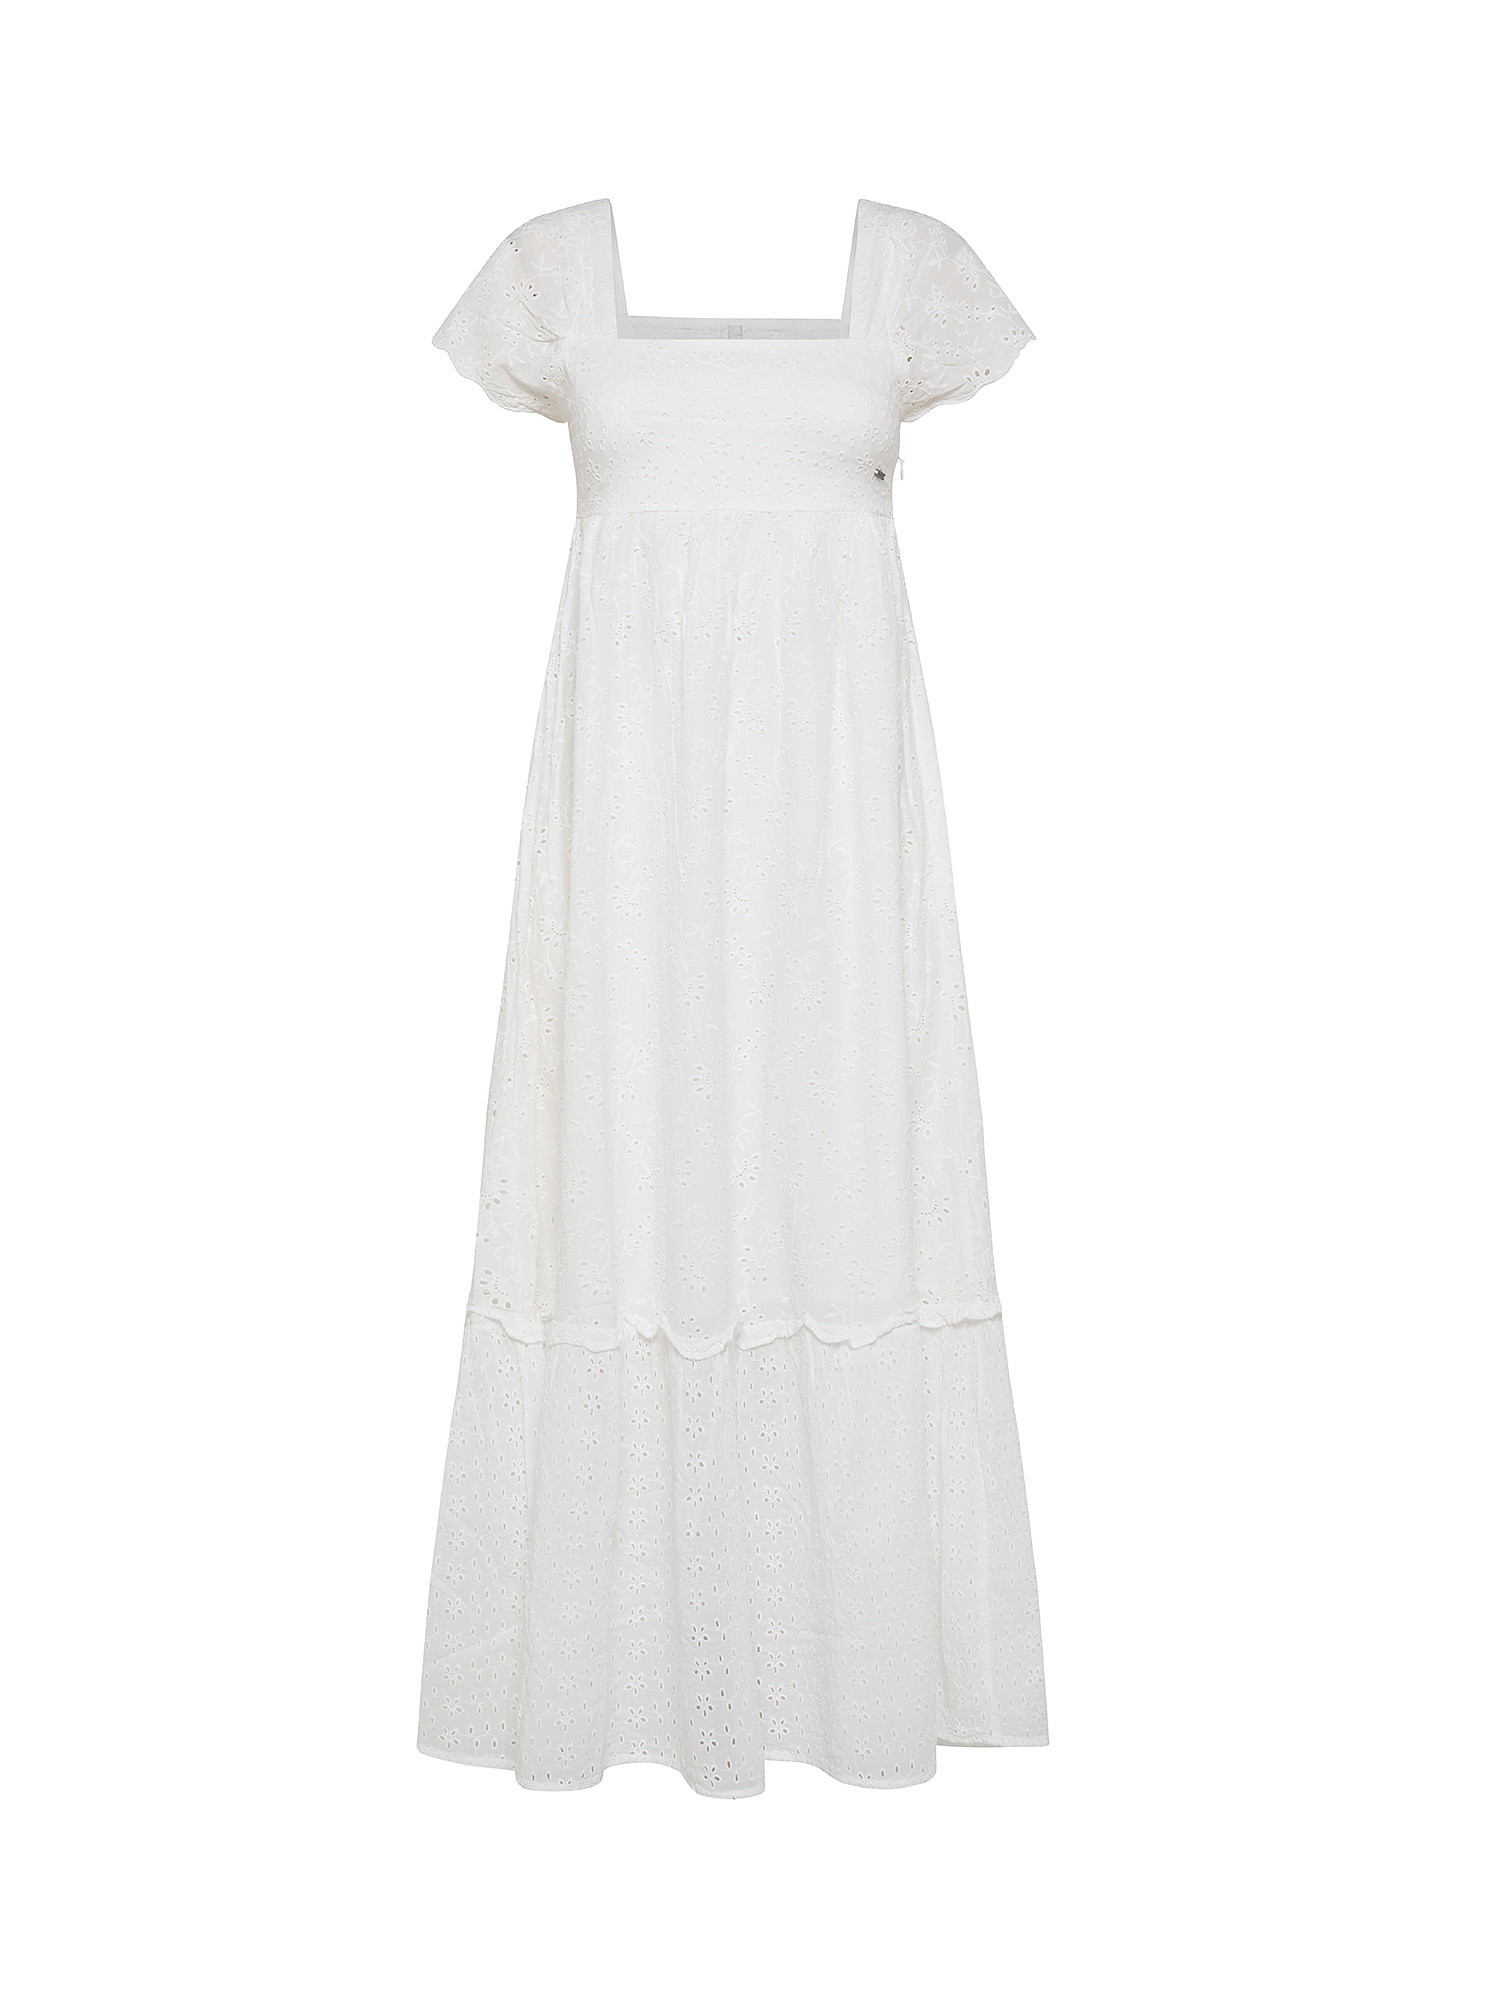 Pepe Jeans - Openwork dress in cotton, White, large image number 0